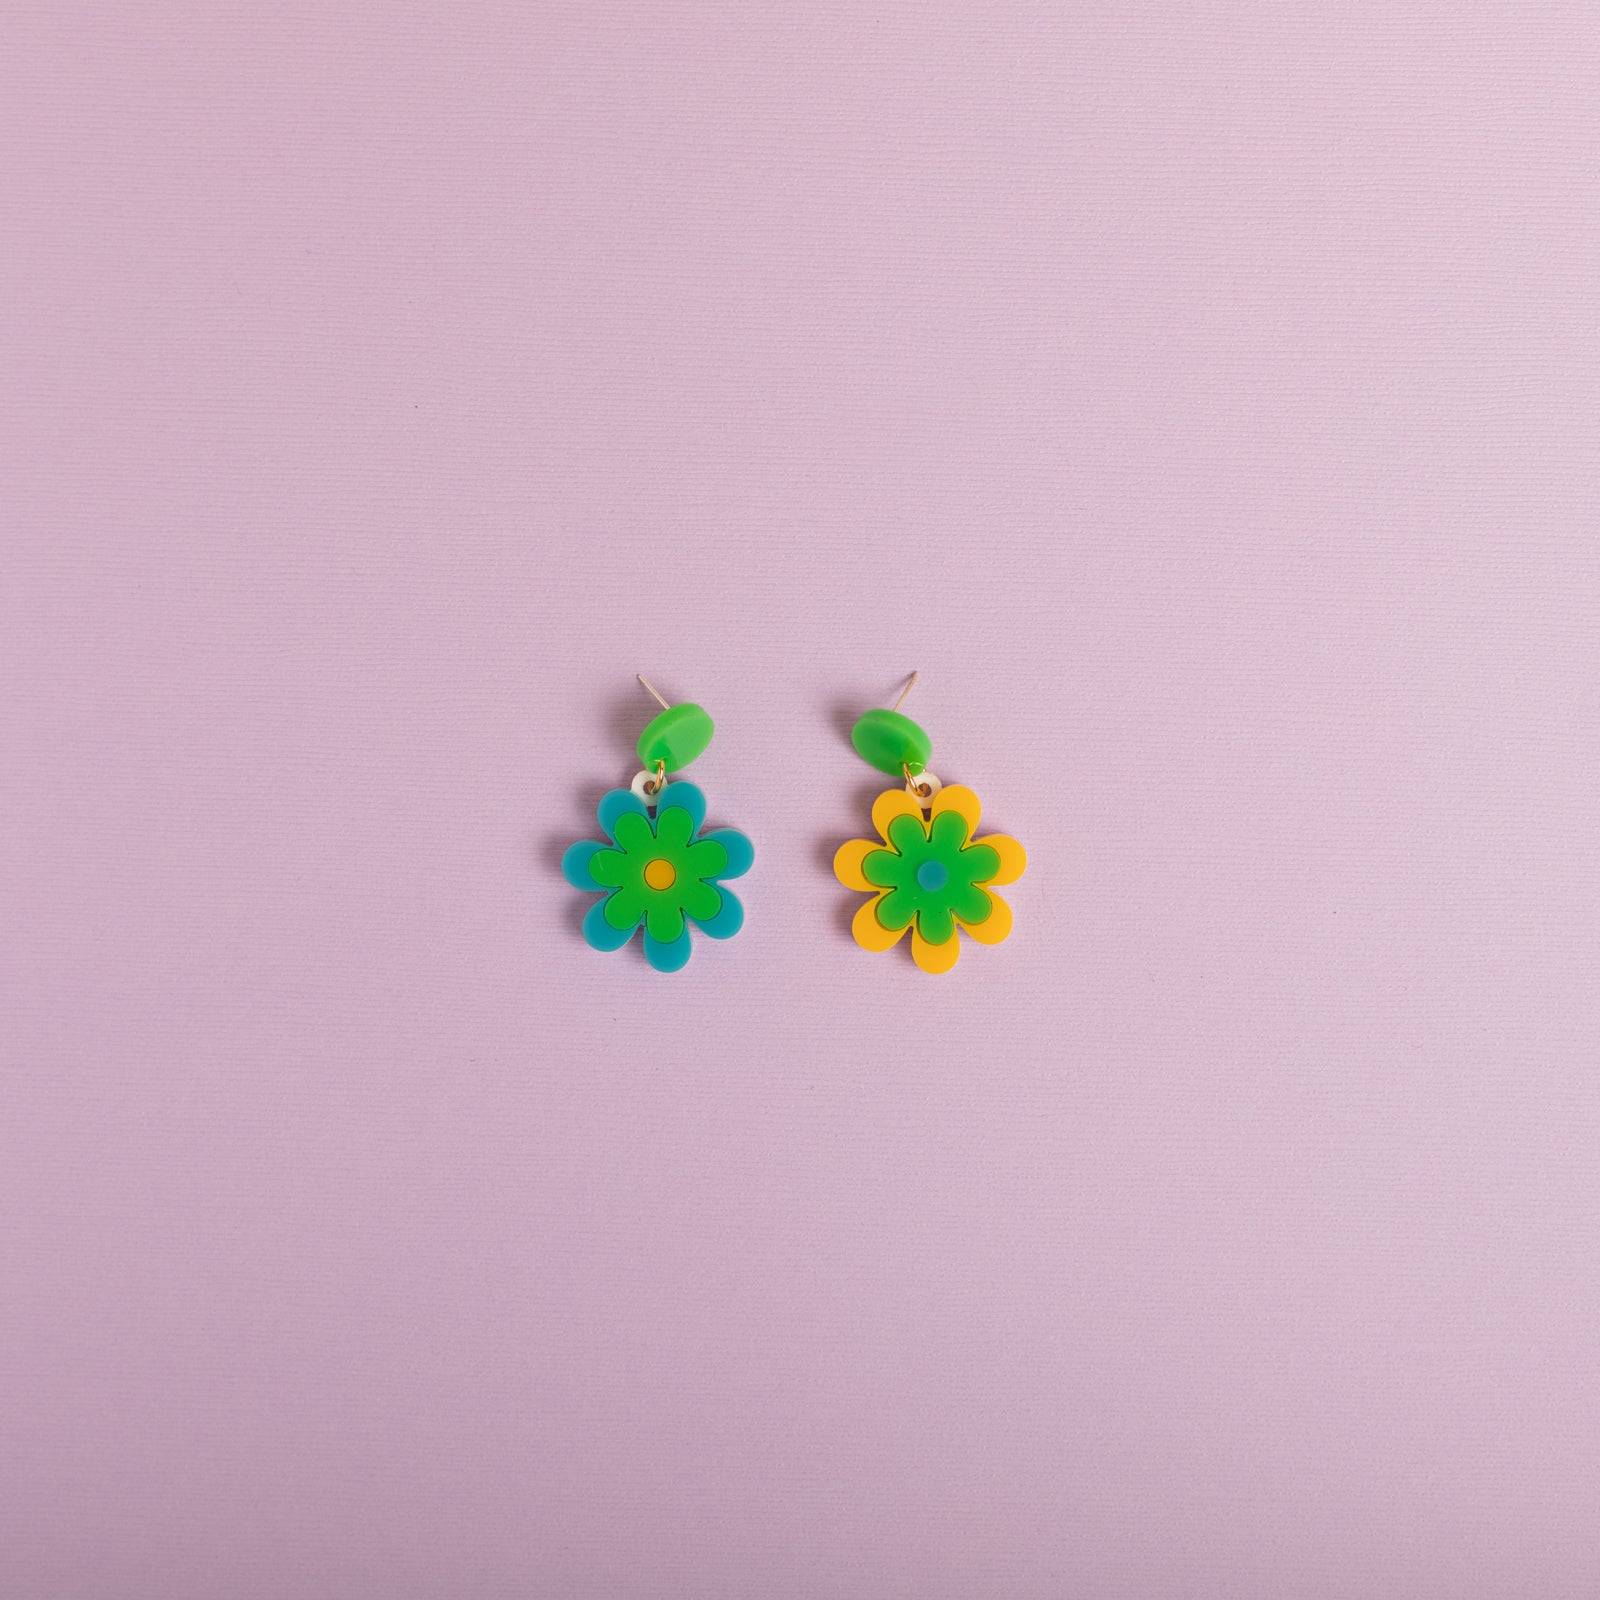 The Baby Candy Daisy Hanging Stud Earrings